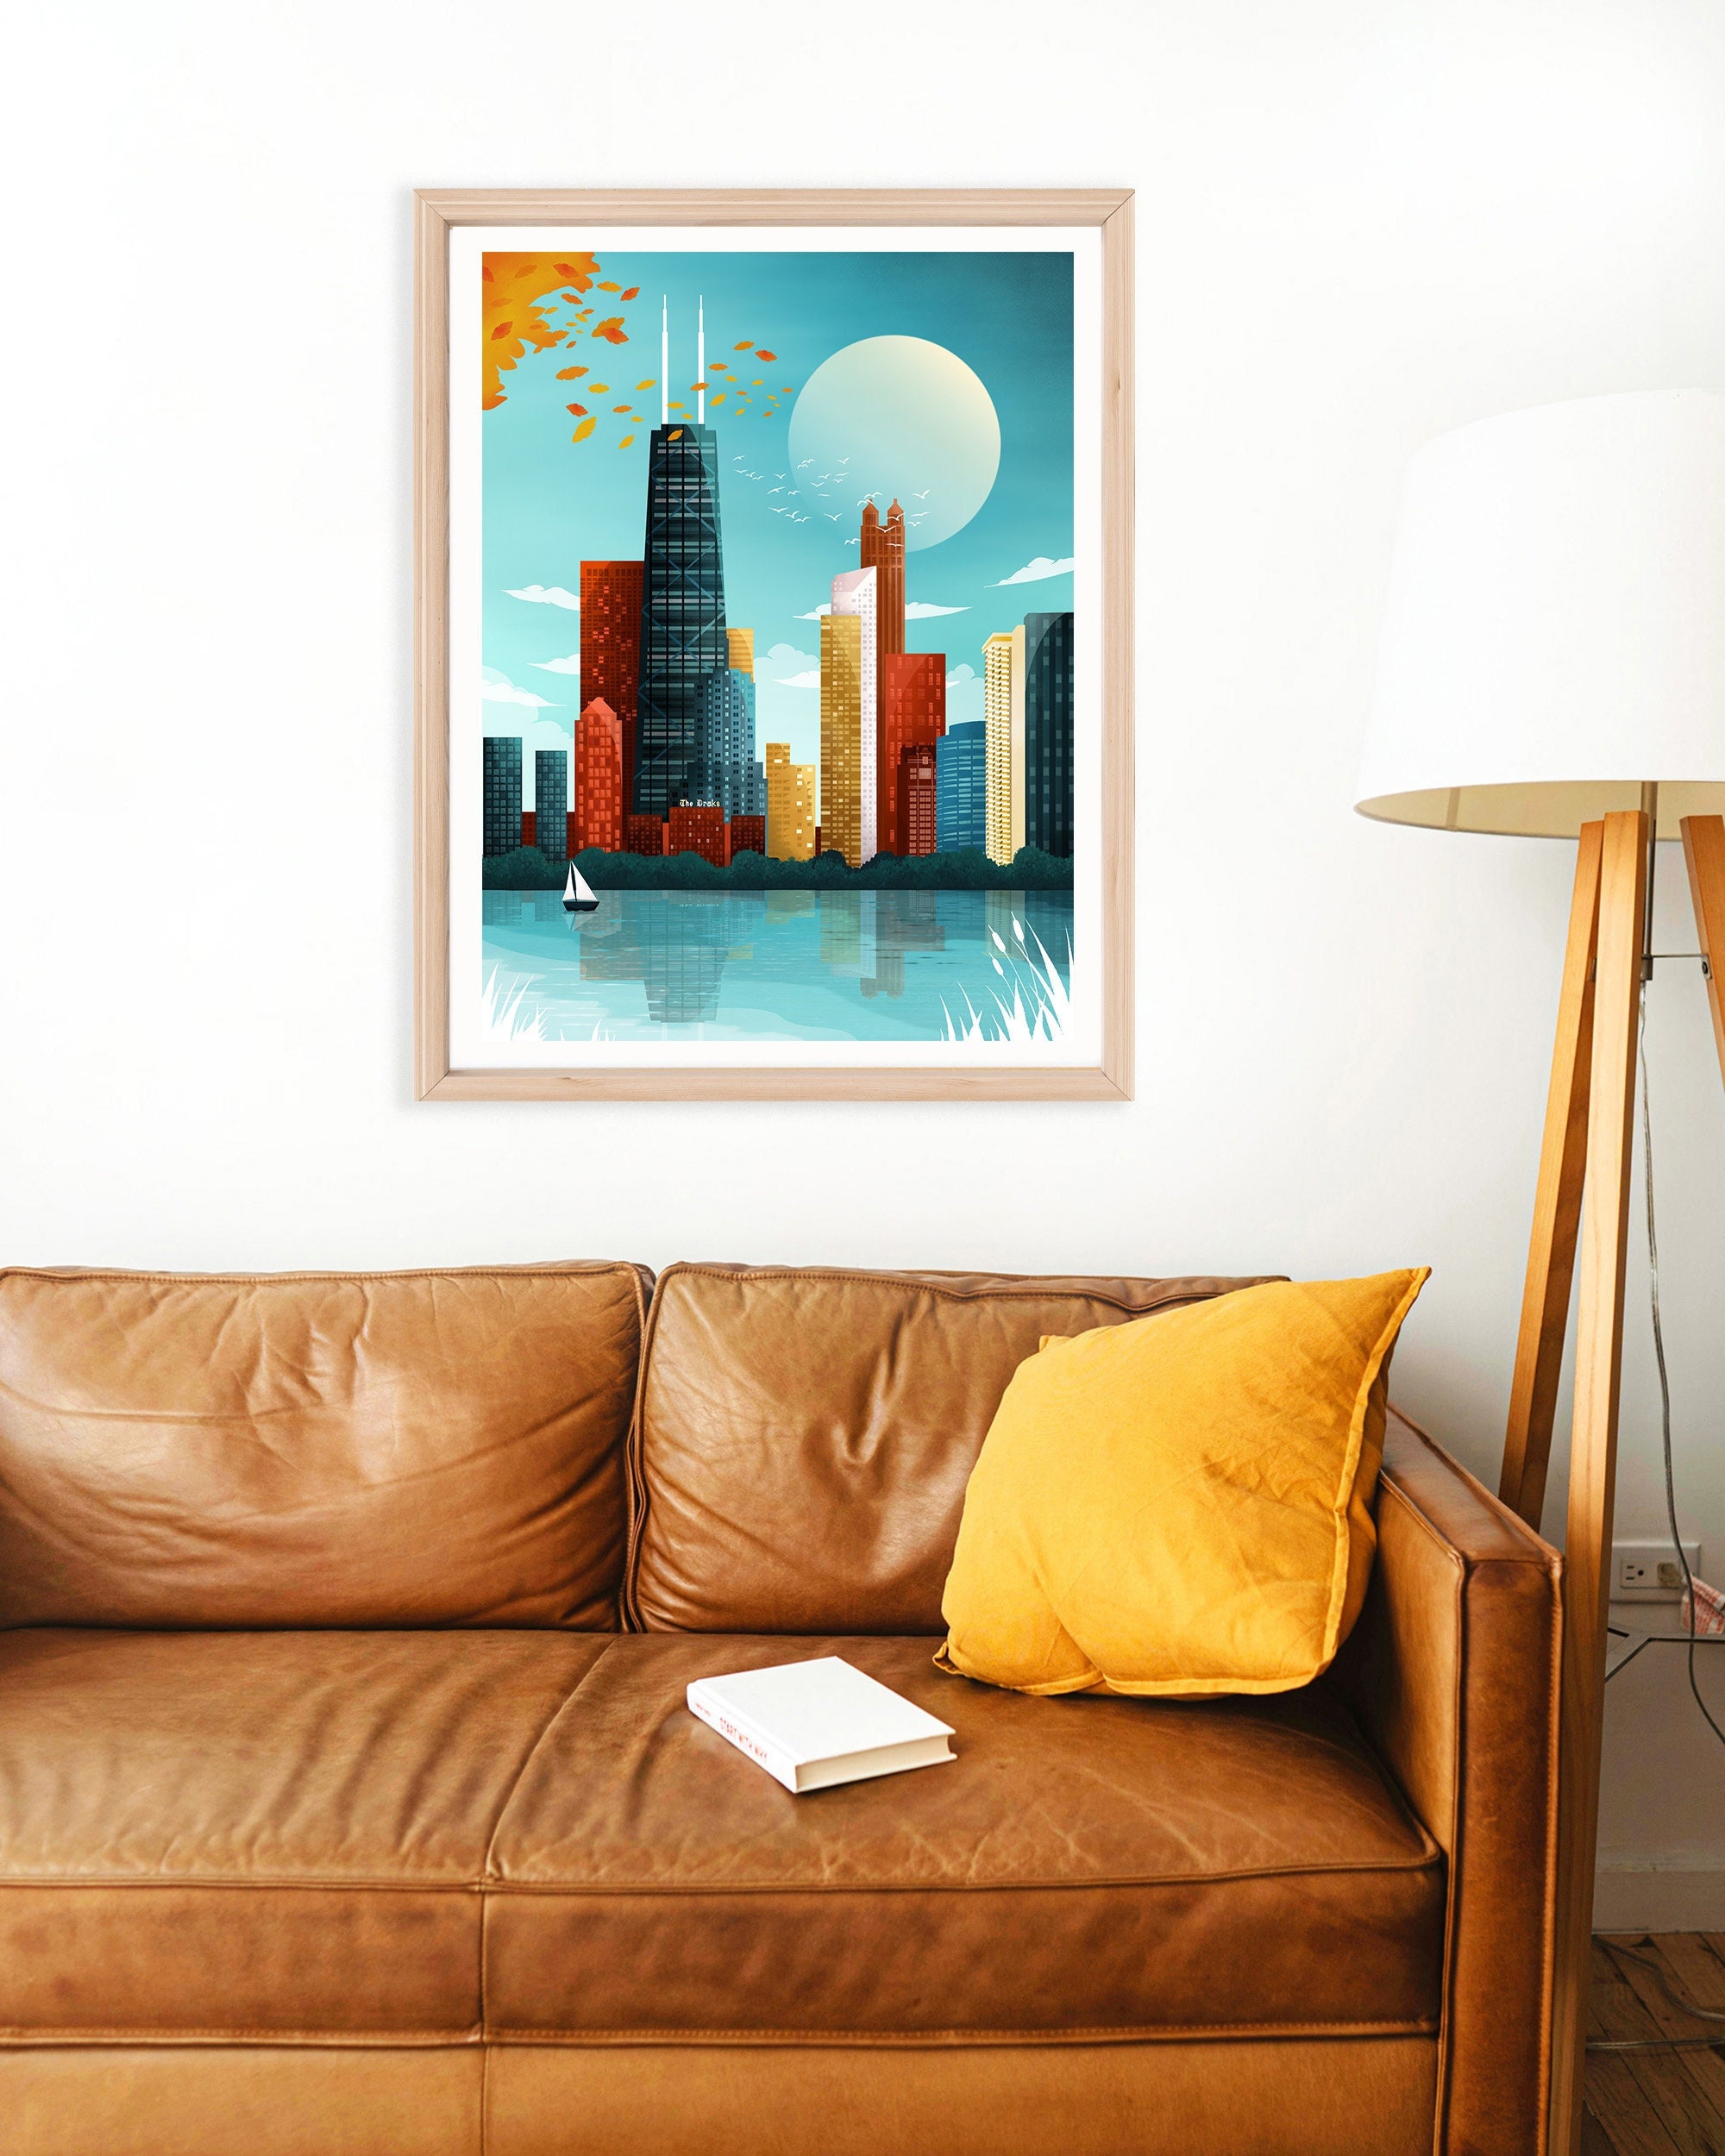 A4 CHICAGO Poster Print Art Poster Wall Art Print Gift Poster Canvas Printing Wall Decor Size 